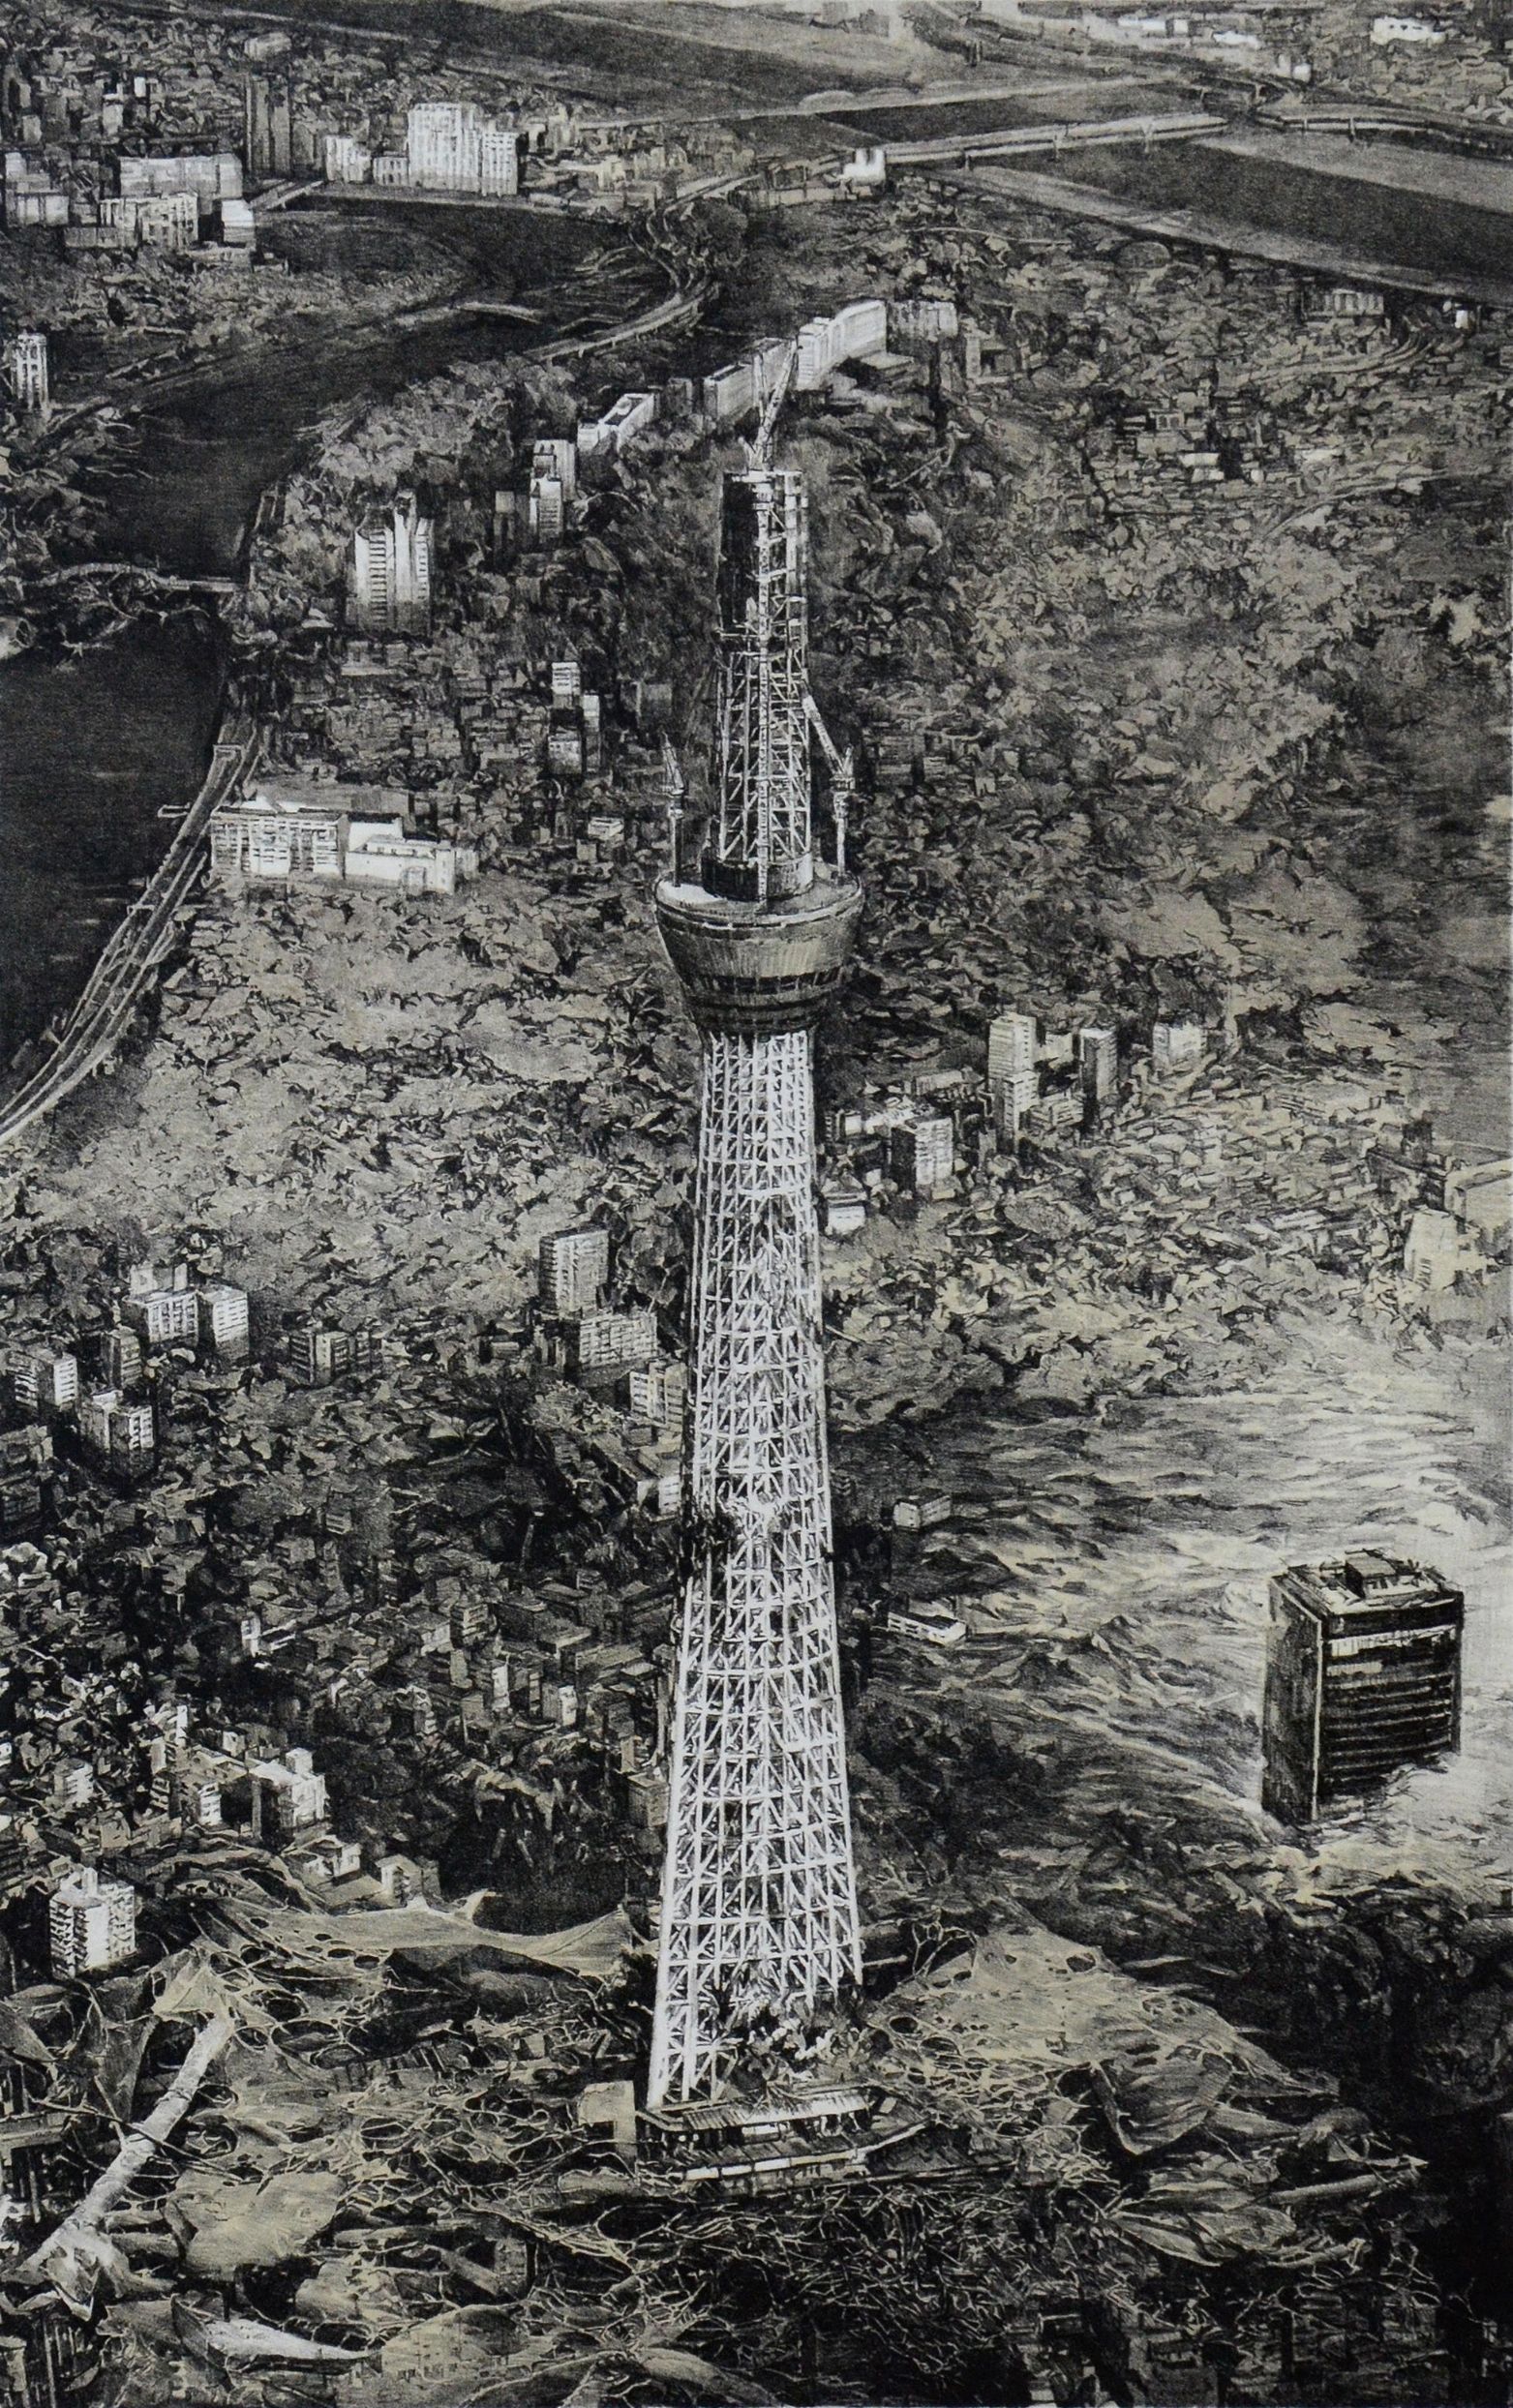 Hisaharu Motoda│Foresight – Tokyo Skytree│e.d. 2/10｜2017｜67 x 38.5 cm｜paper, ink and lithograph